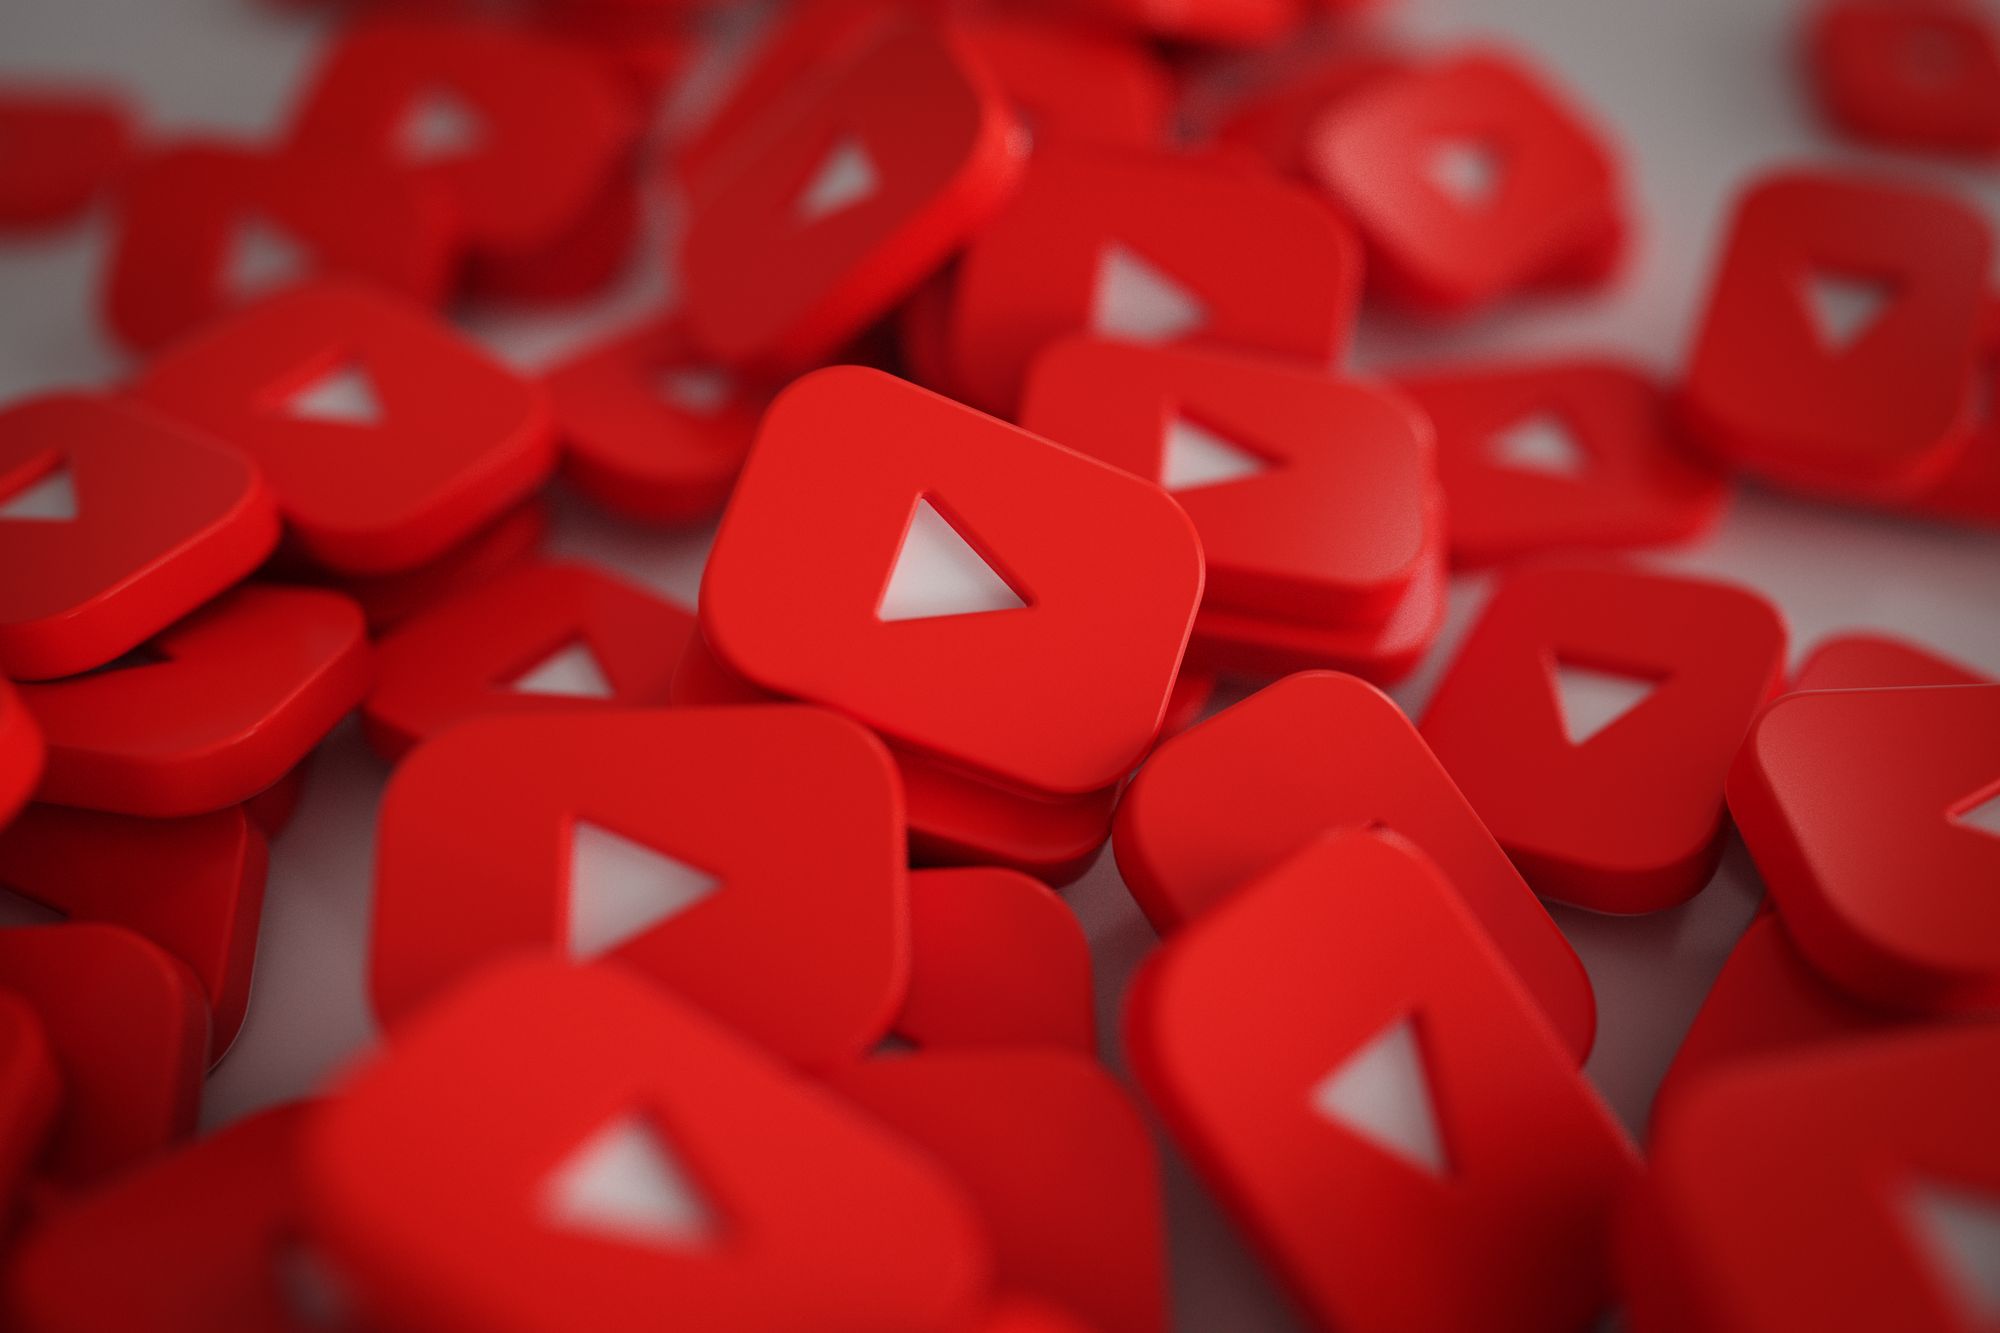 Youtube Influencers Have Been Found Promoting Fraudulent Enterprises